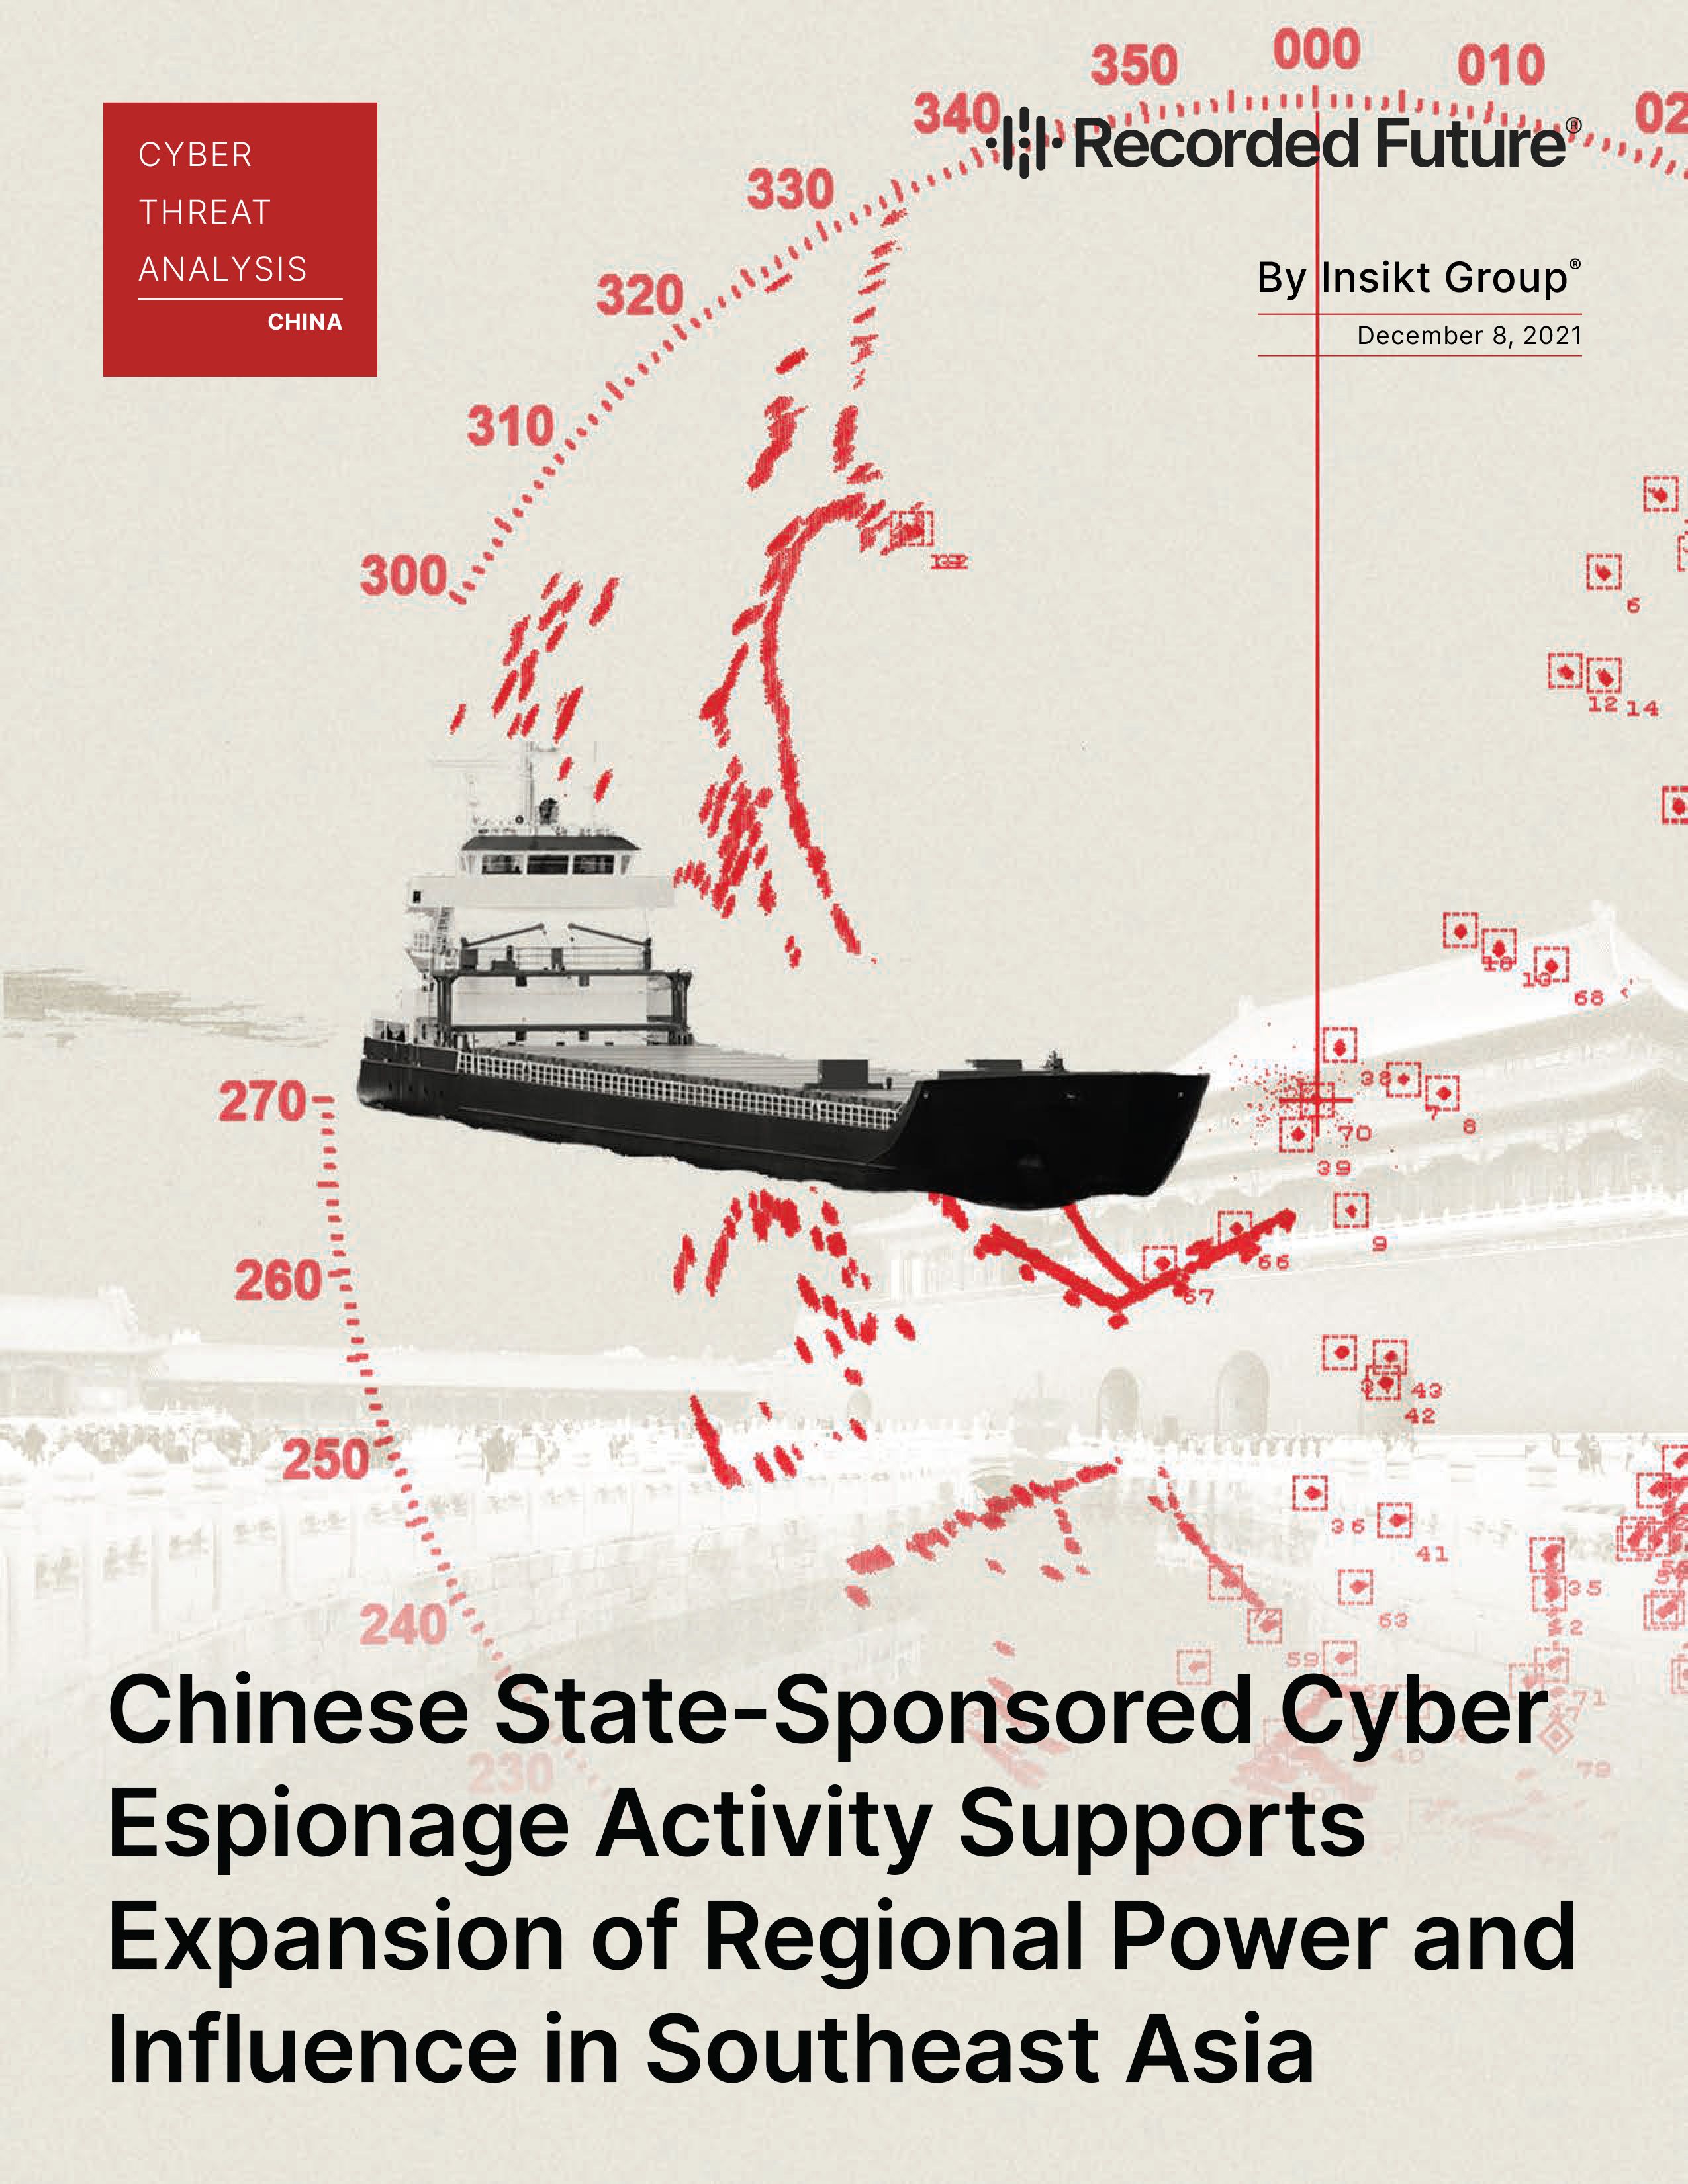 Chinese State-Sponsored Cyber Espionage Activity Supports Expansion of Regional Power and Influence in Southeast Asia